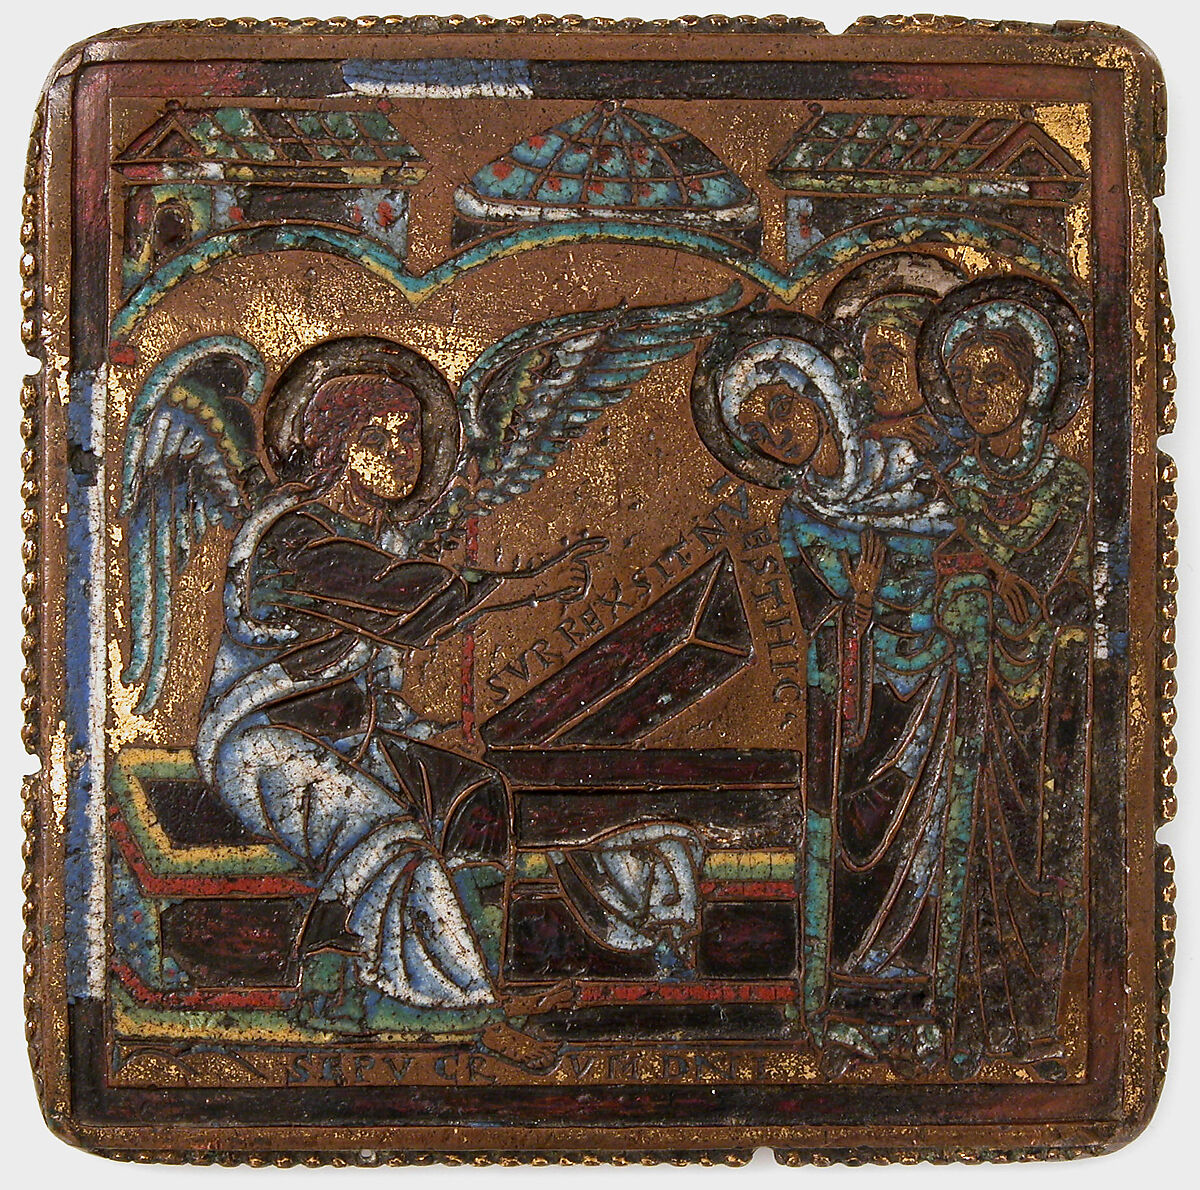 Plaque with the Holy Women at the Sepulchre, Champlevé enamel, copper alloy, gilt, South Netherlandish